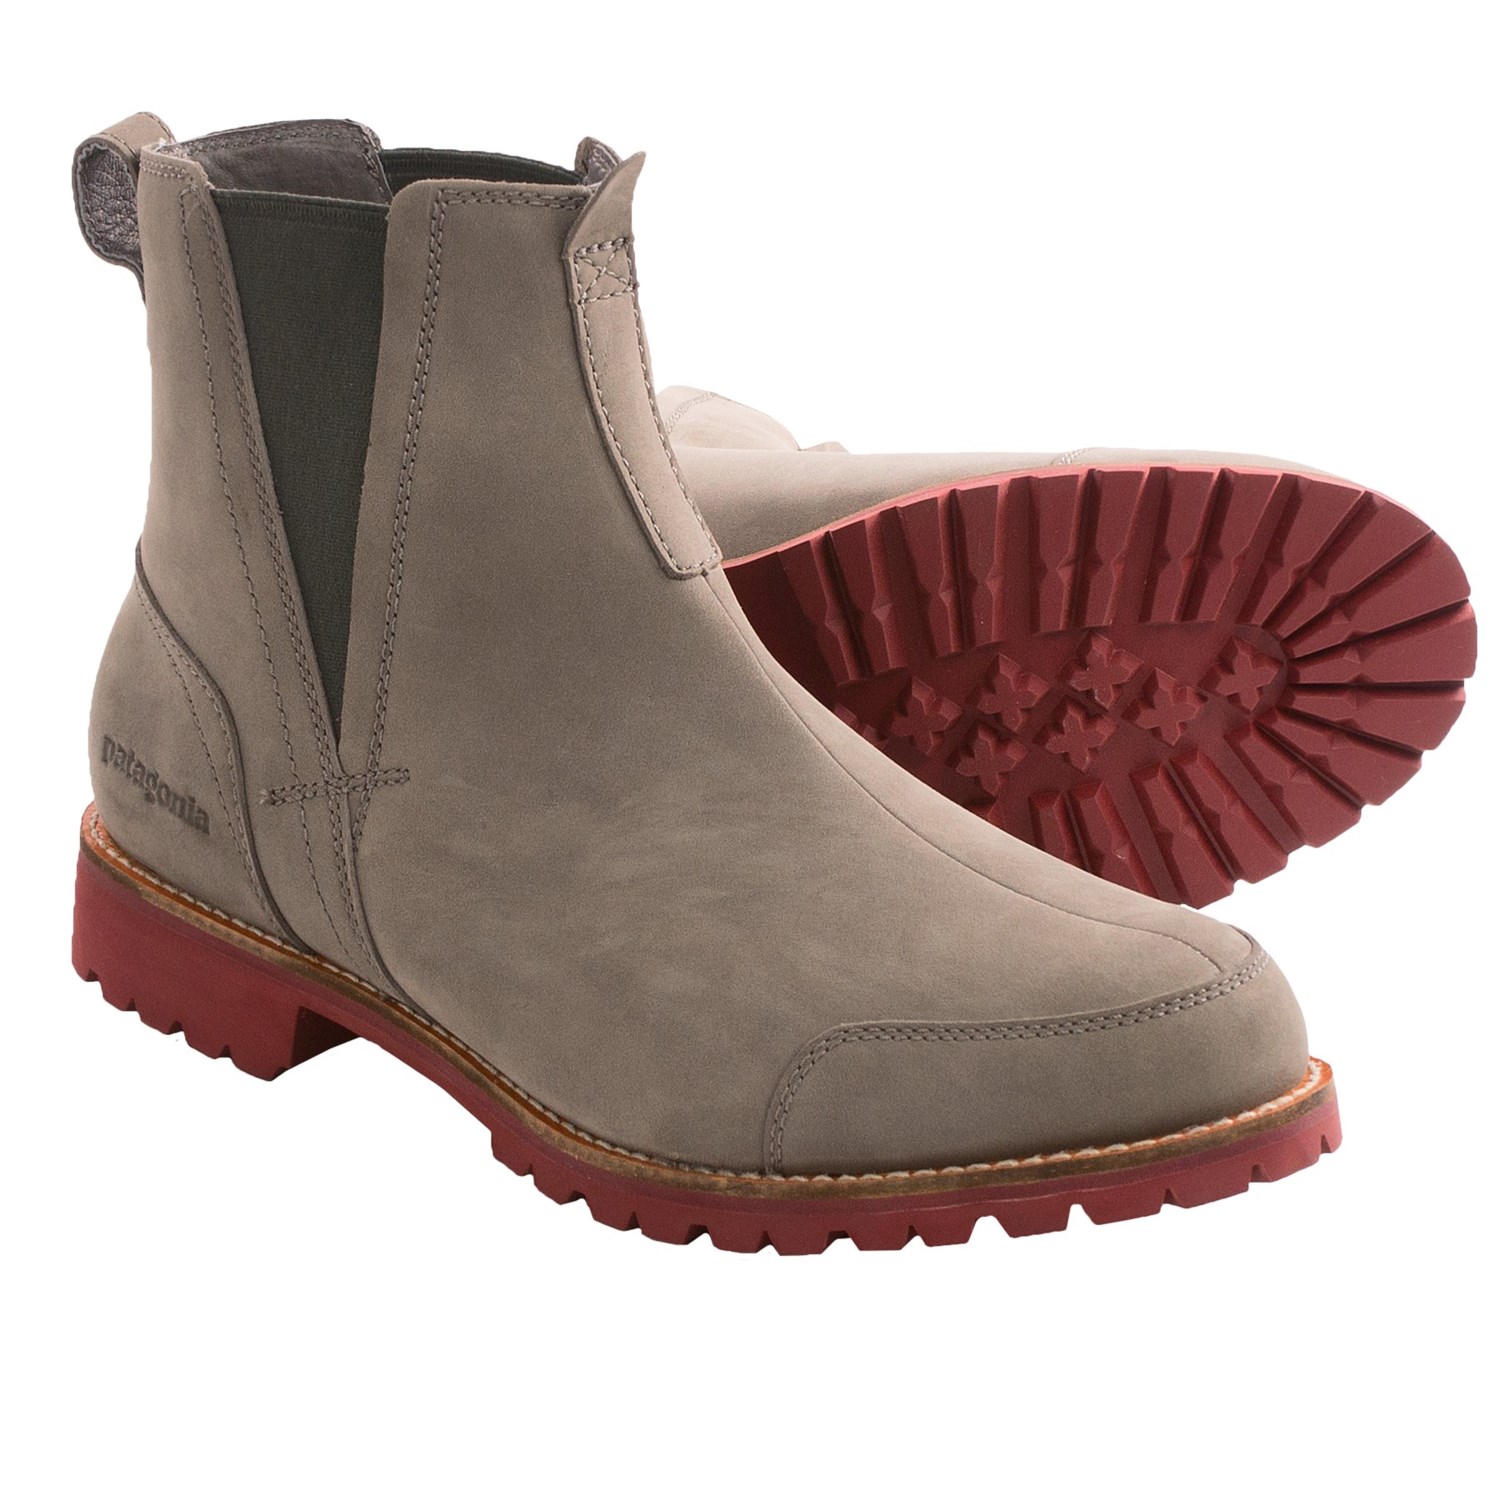 Patagonia Tin Shed Chelsea Boots (For Men) in Bungee Cord